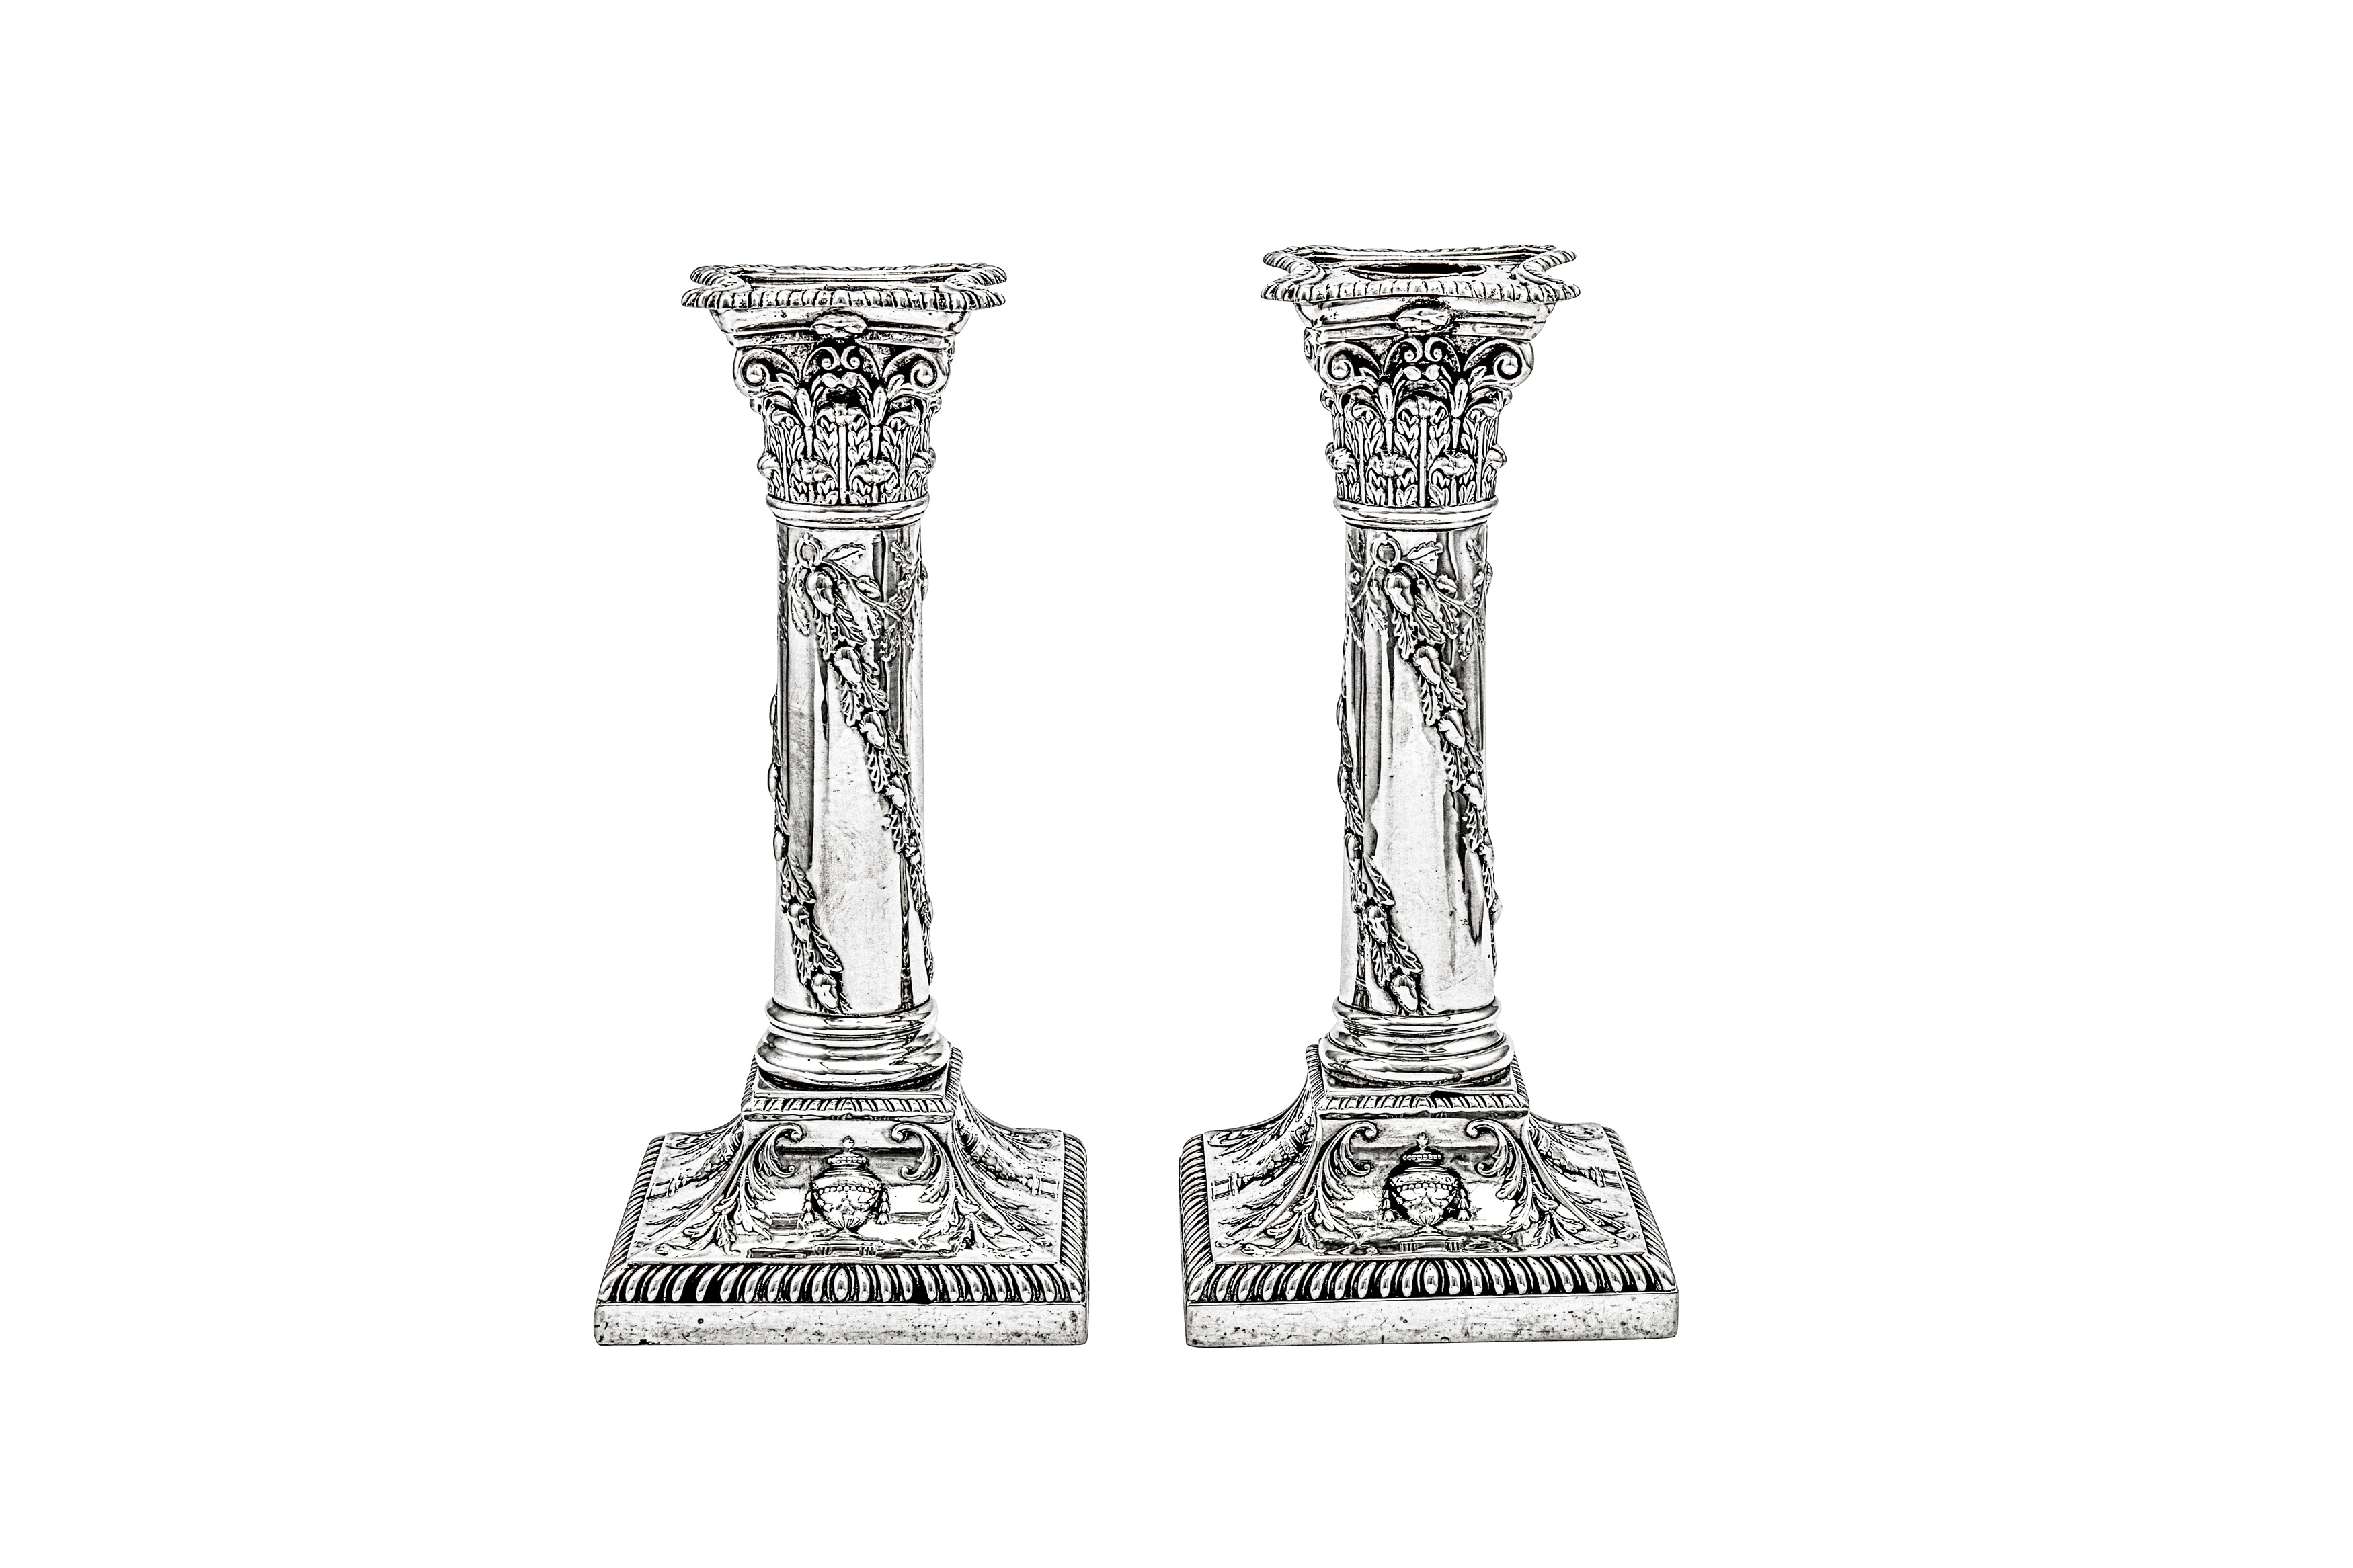 A pair of Victorian sterling silver candlesticks, London 1899 by Thomas Bradbury and Sons